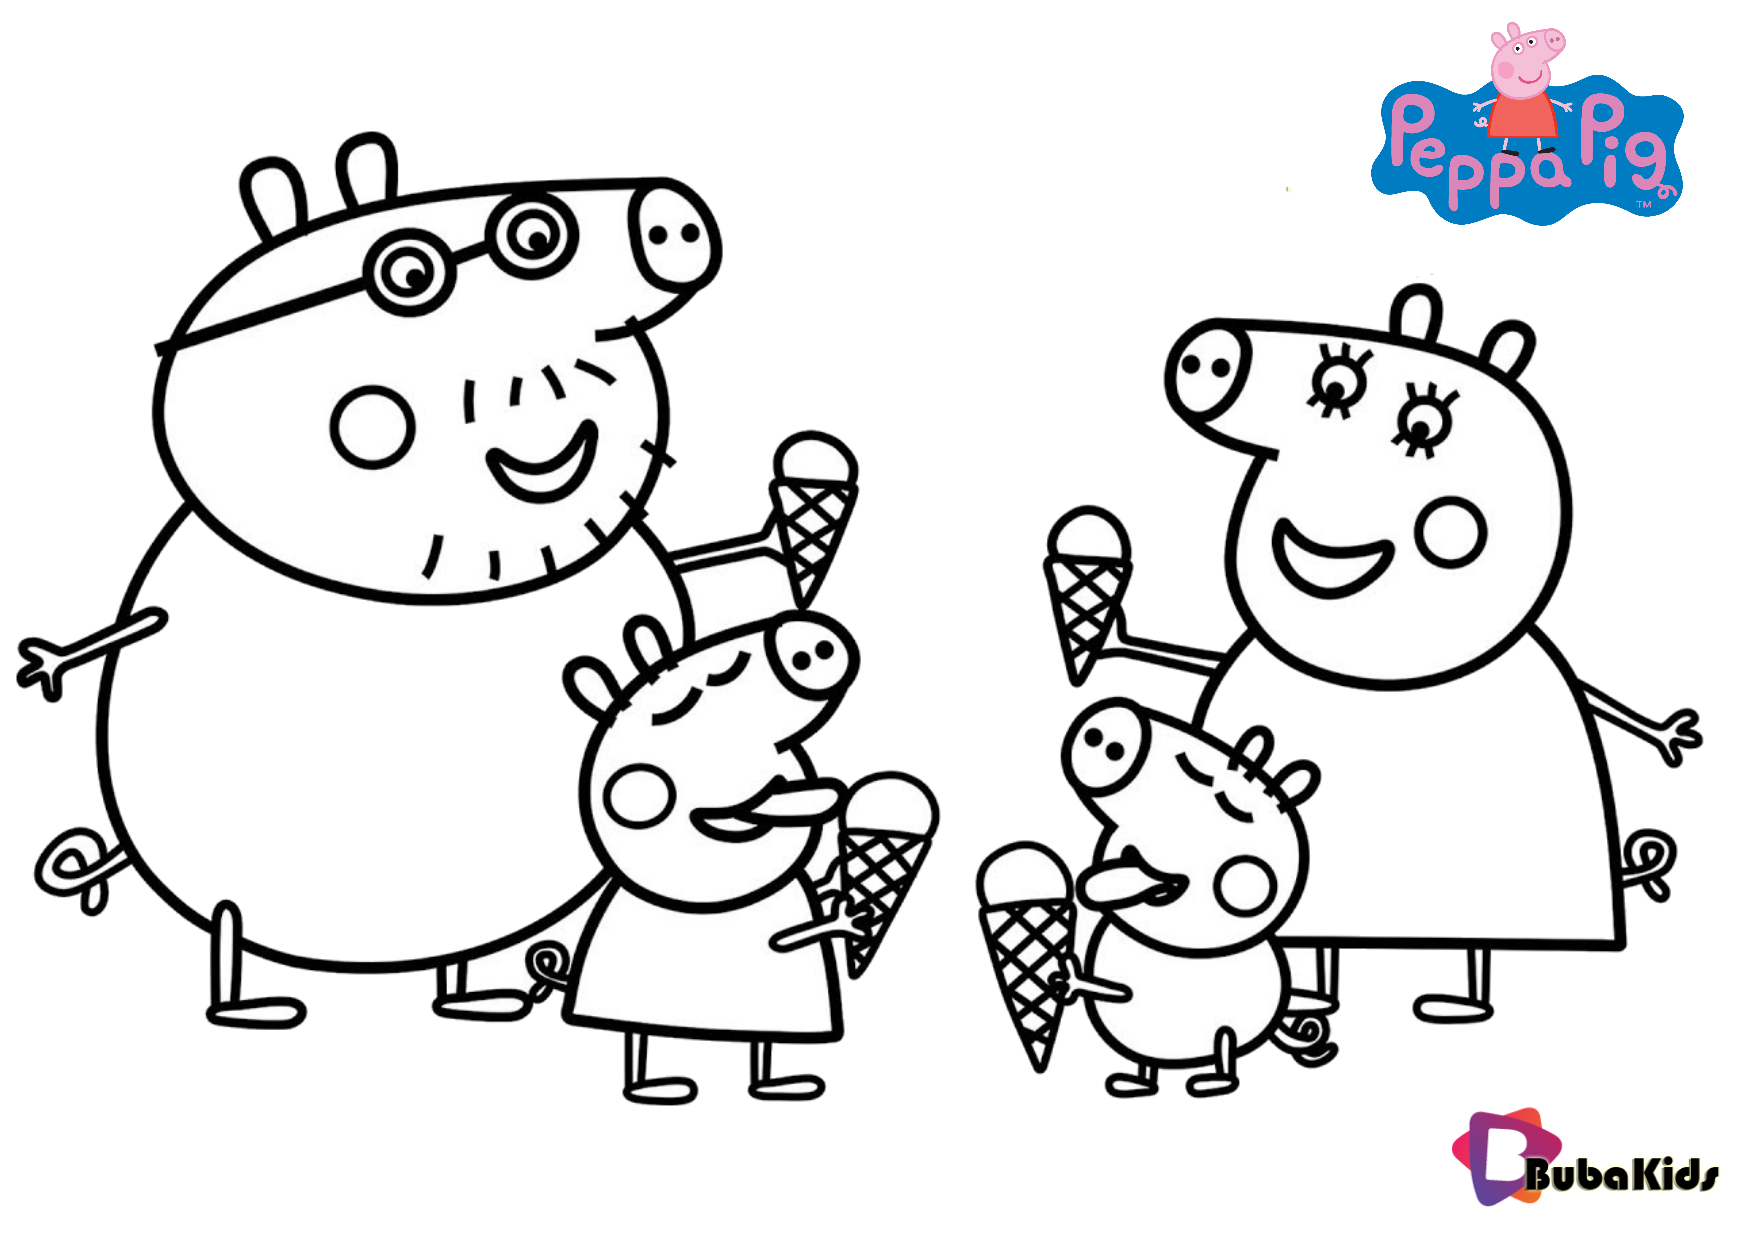 Peppa pig family and ice cream coloring pages - BubaKids.com